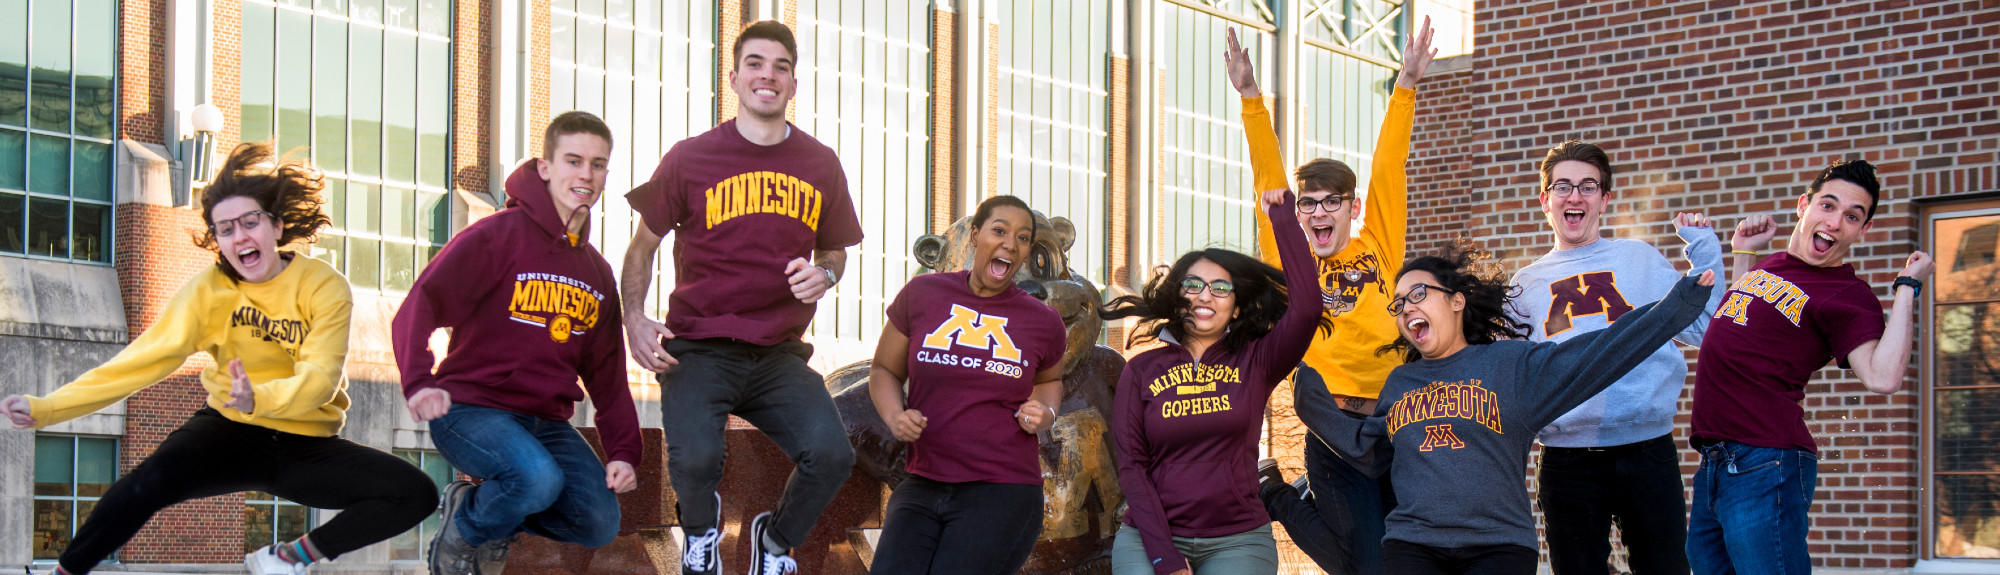 UMN Students jump in front of the Goldy Statue